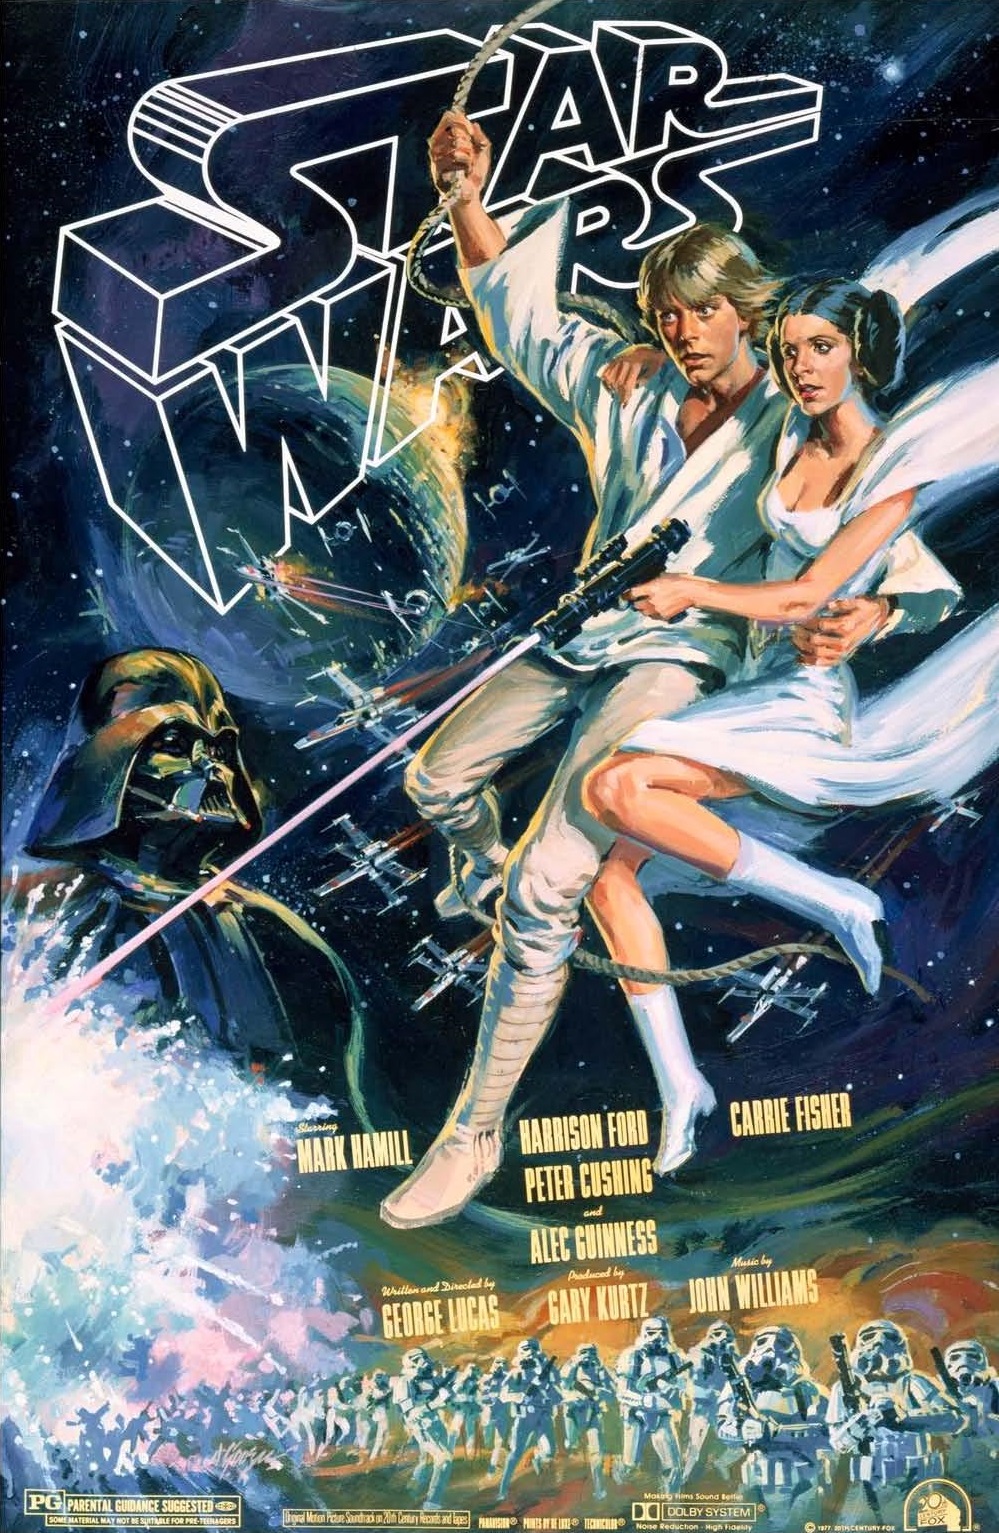 Pic of the Day: Star Wars (1977) | deep fried movies